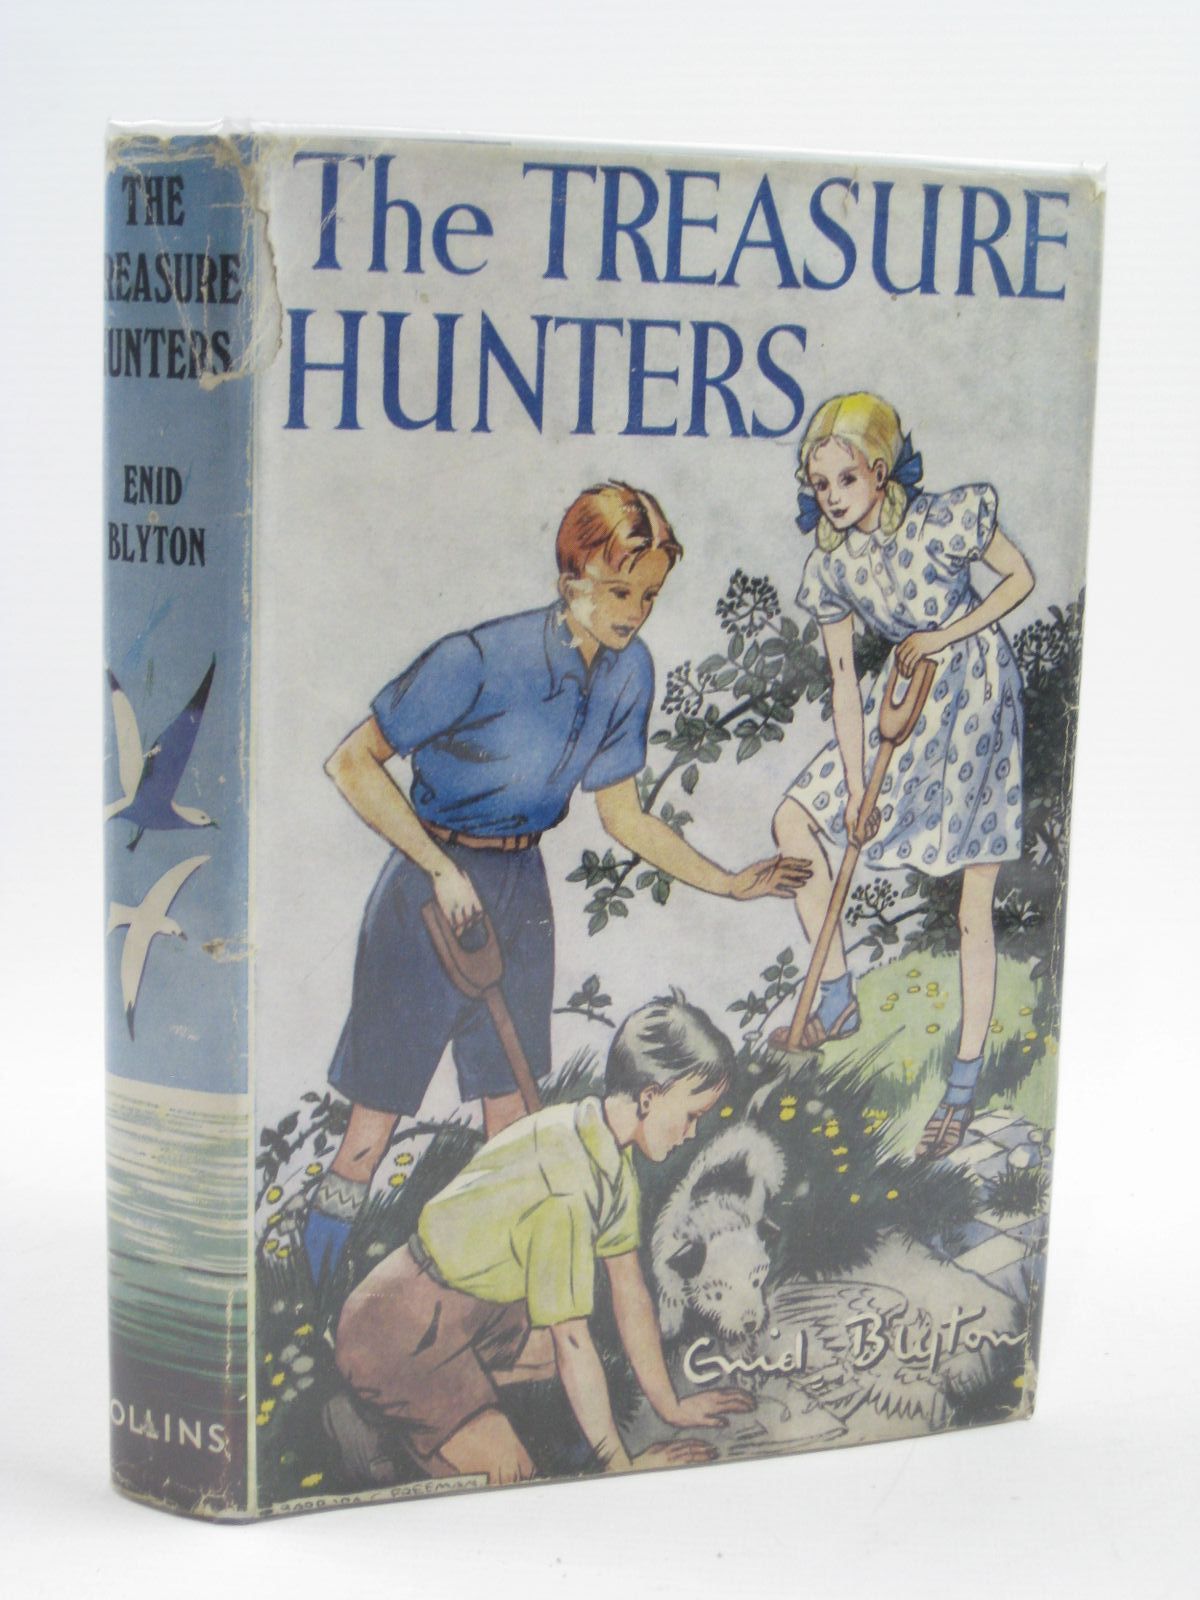 Cover of THE TREASURE HUNTERS by Enid Blyton